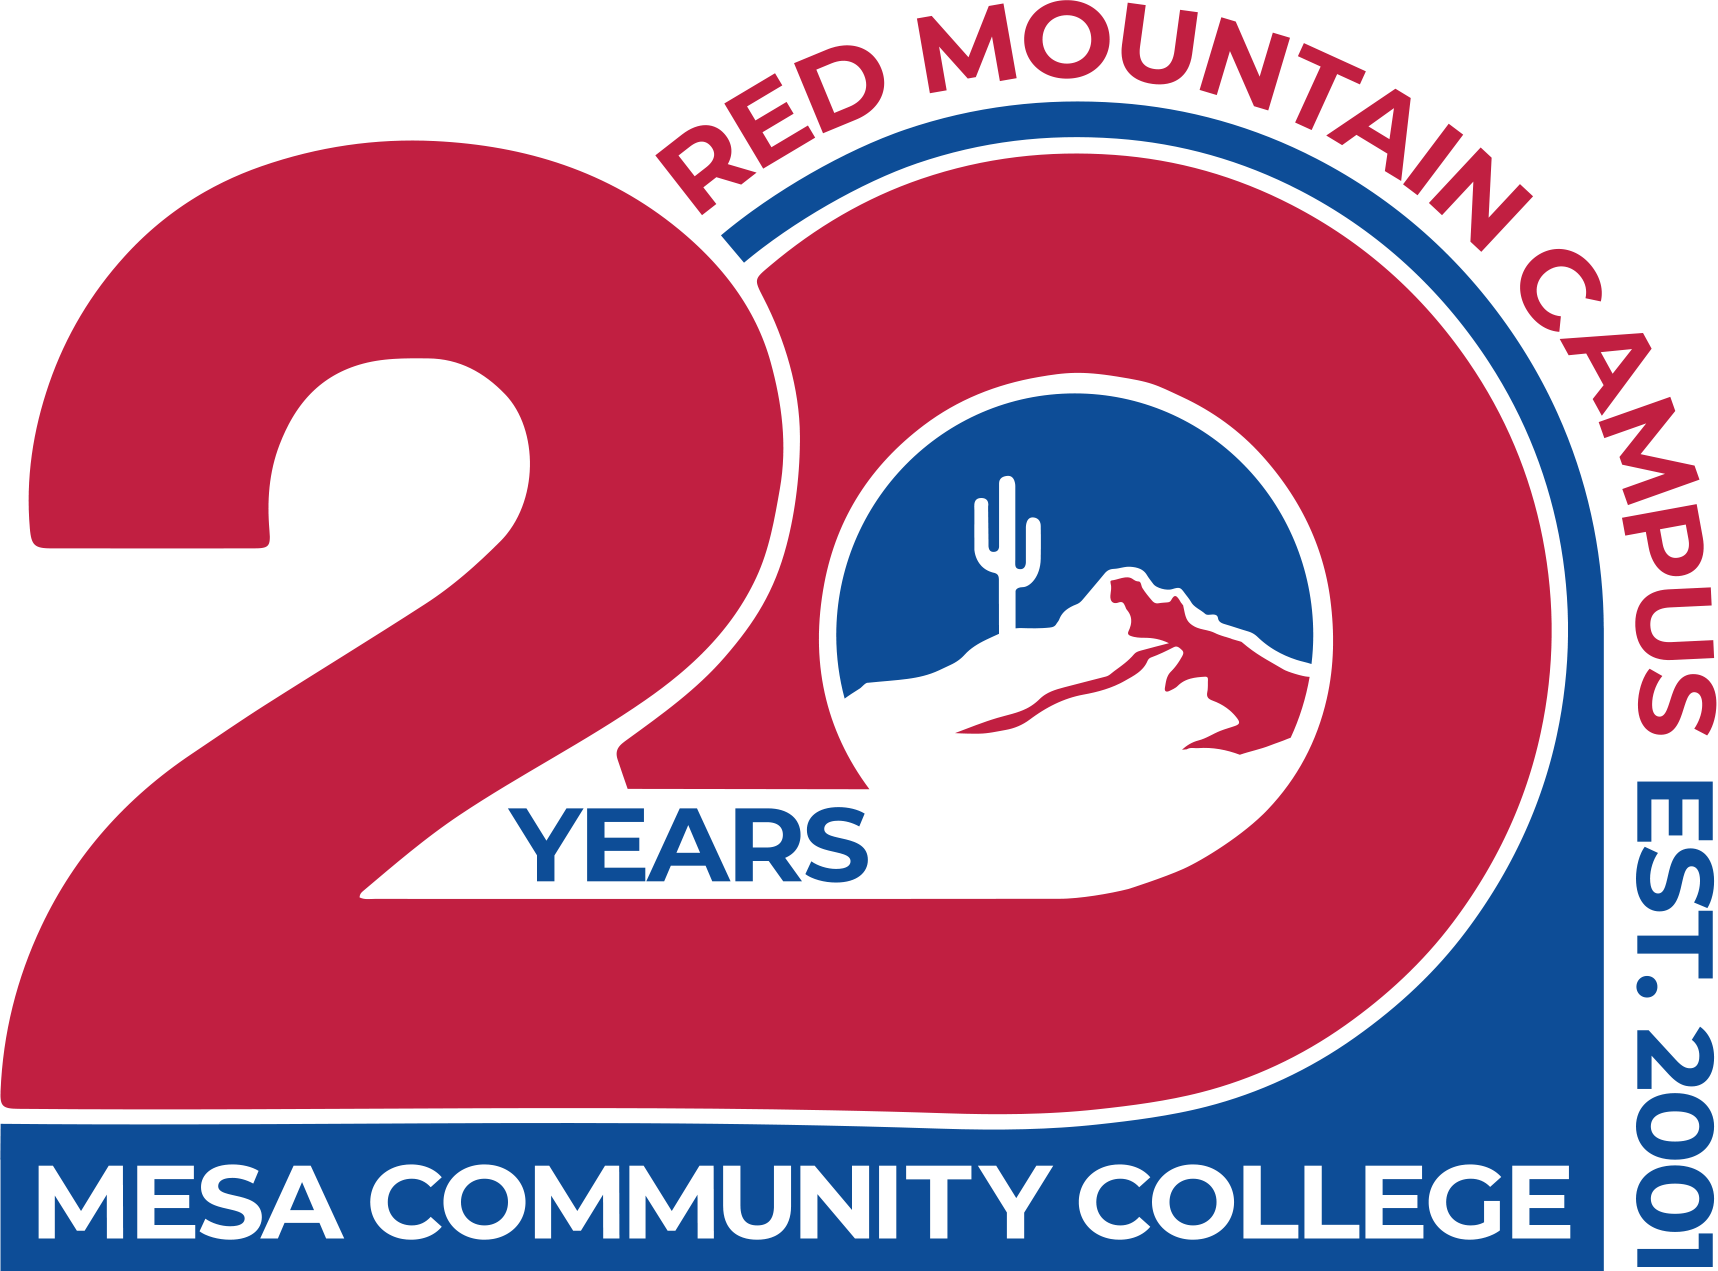 Mesa Community College Red Mountain Campus - Celebrating 20 Years